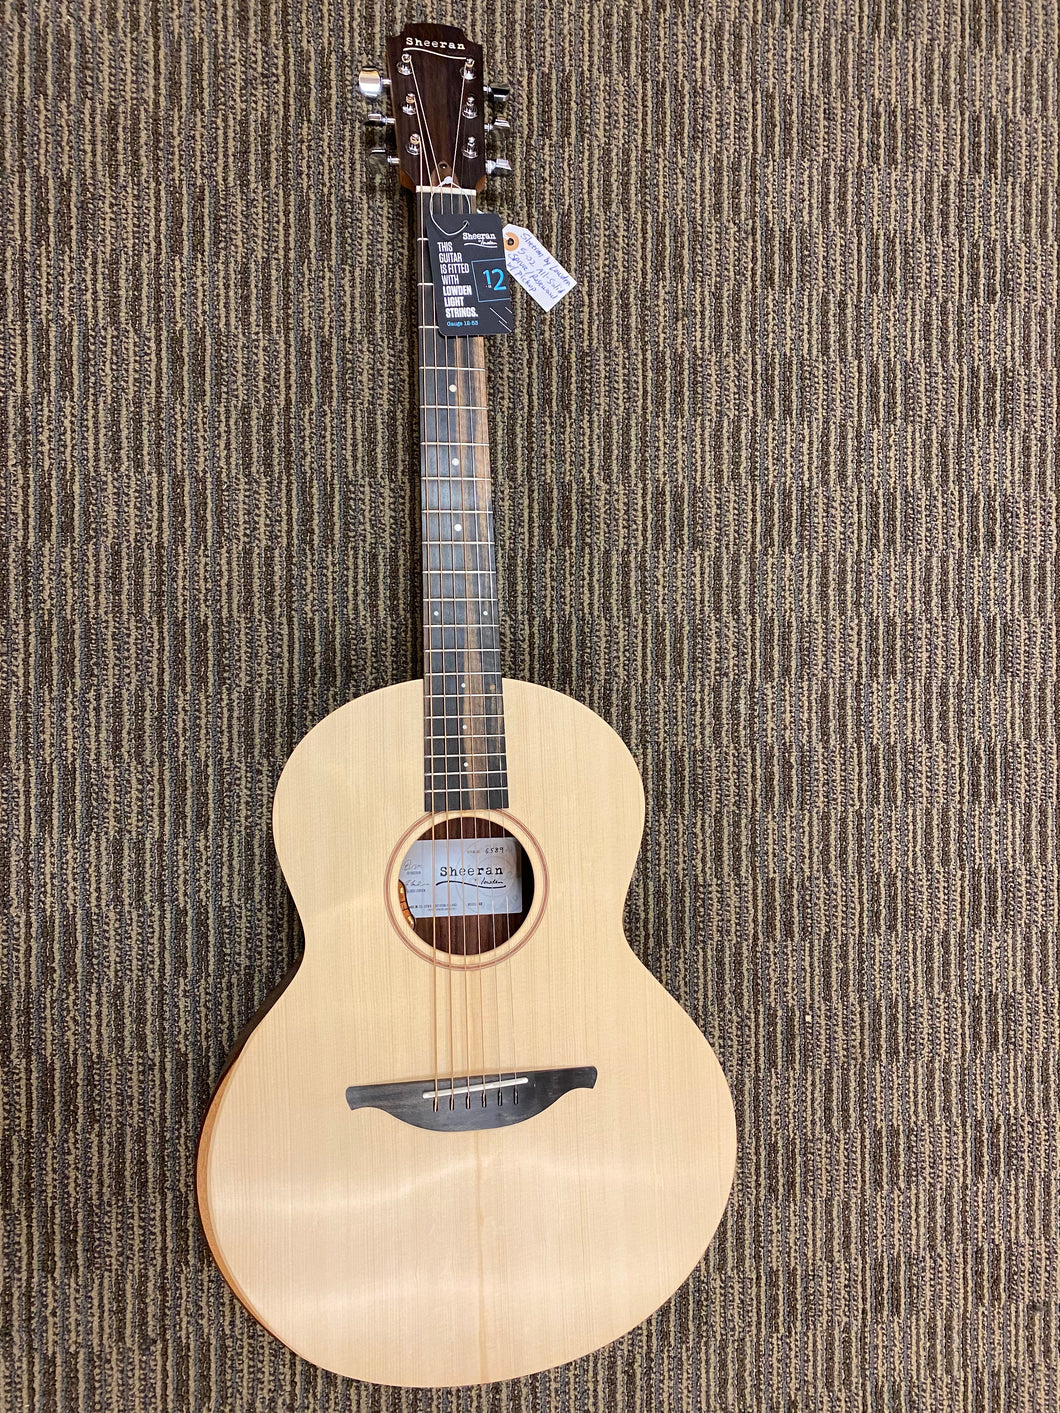 Sheeran By Lowden S-02 guitar (Spruce/Rosewood)